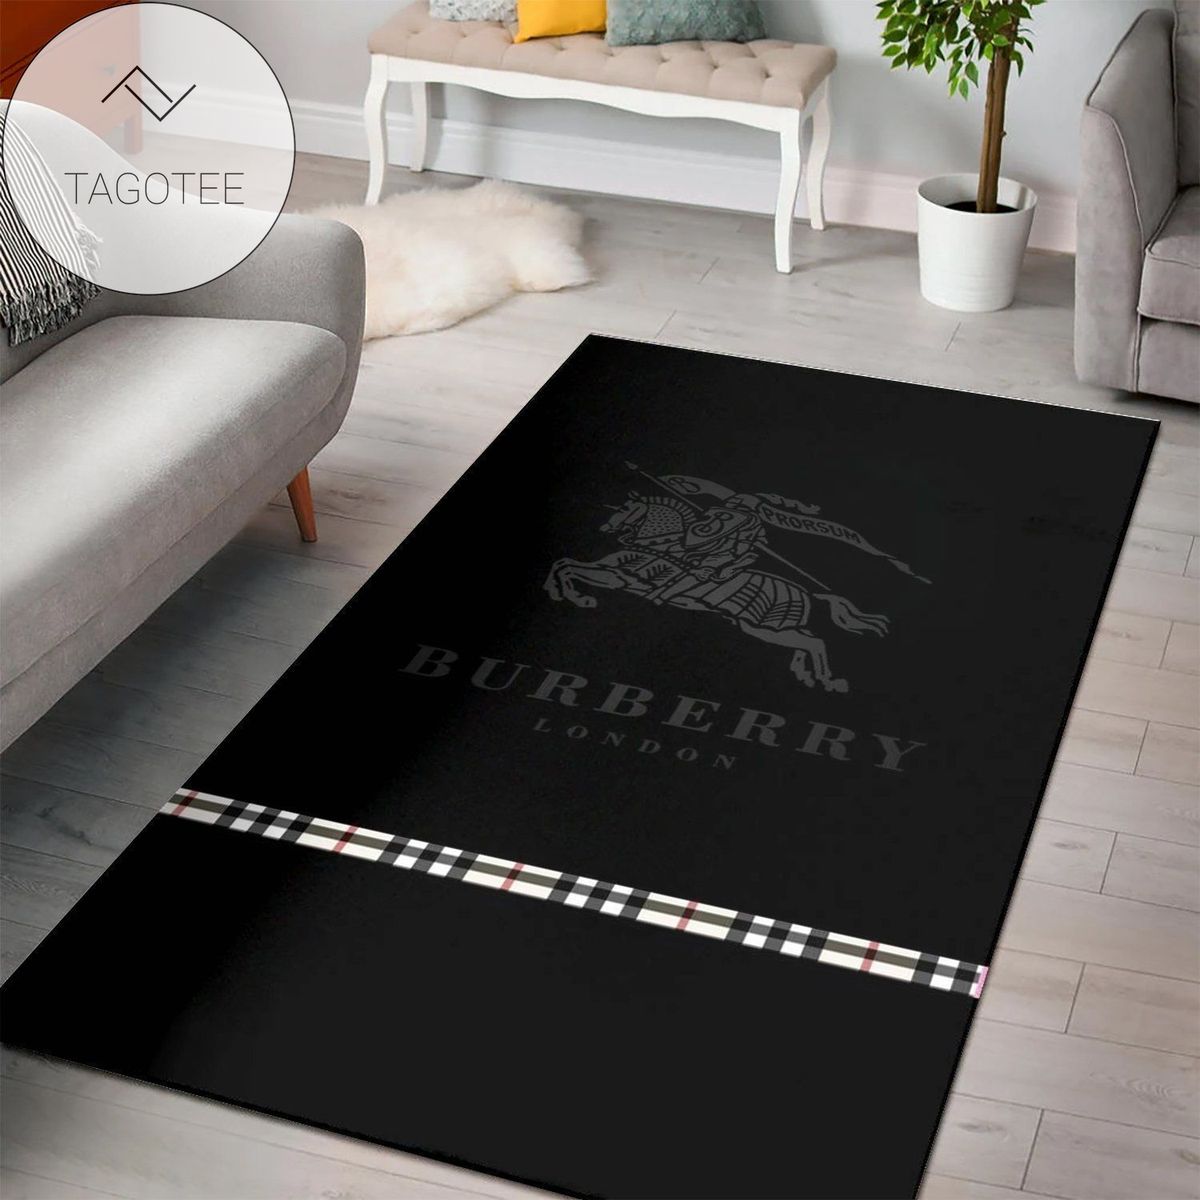 Burberry Luxury Brand 21 Area Rug Carpet Living Room And Bedroom Mat